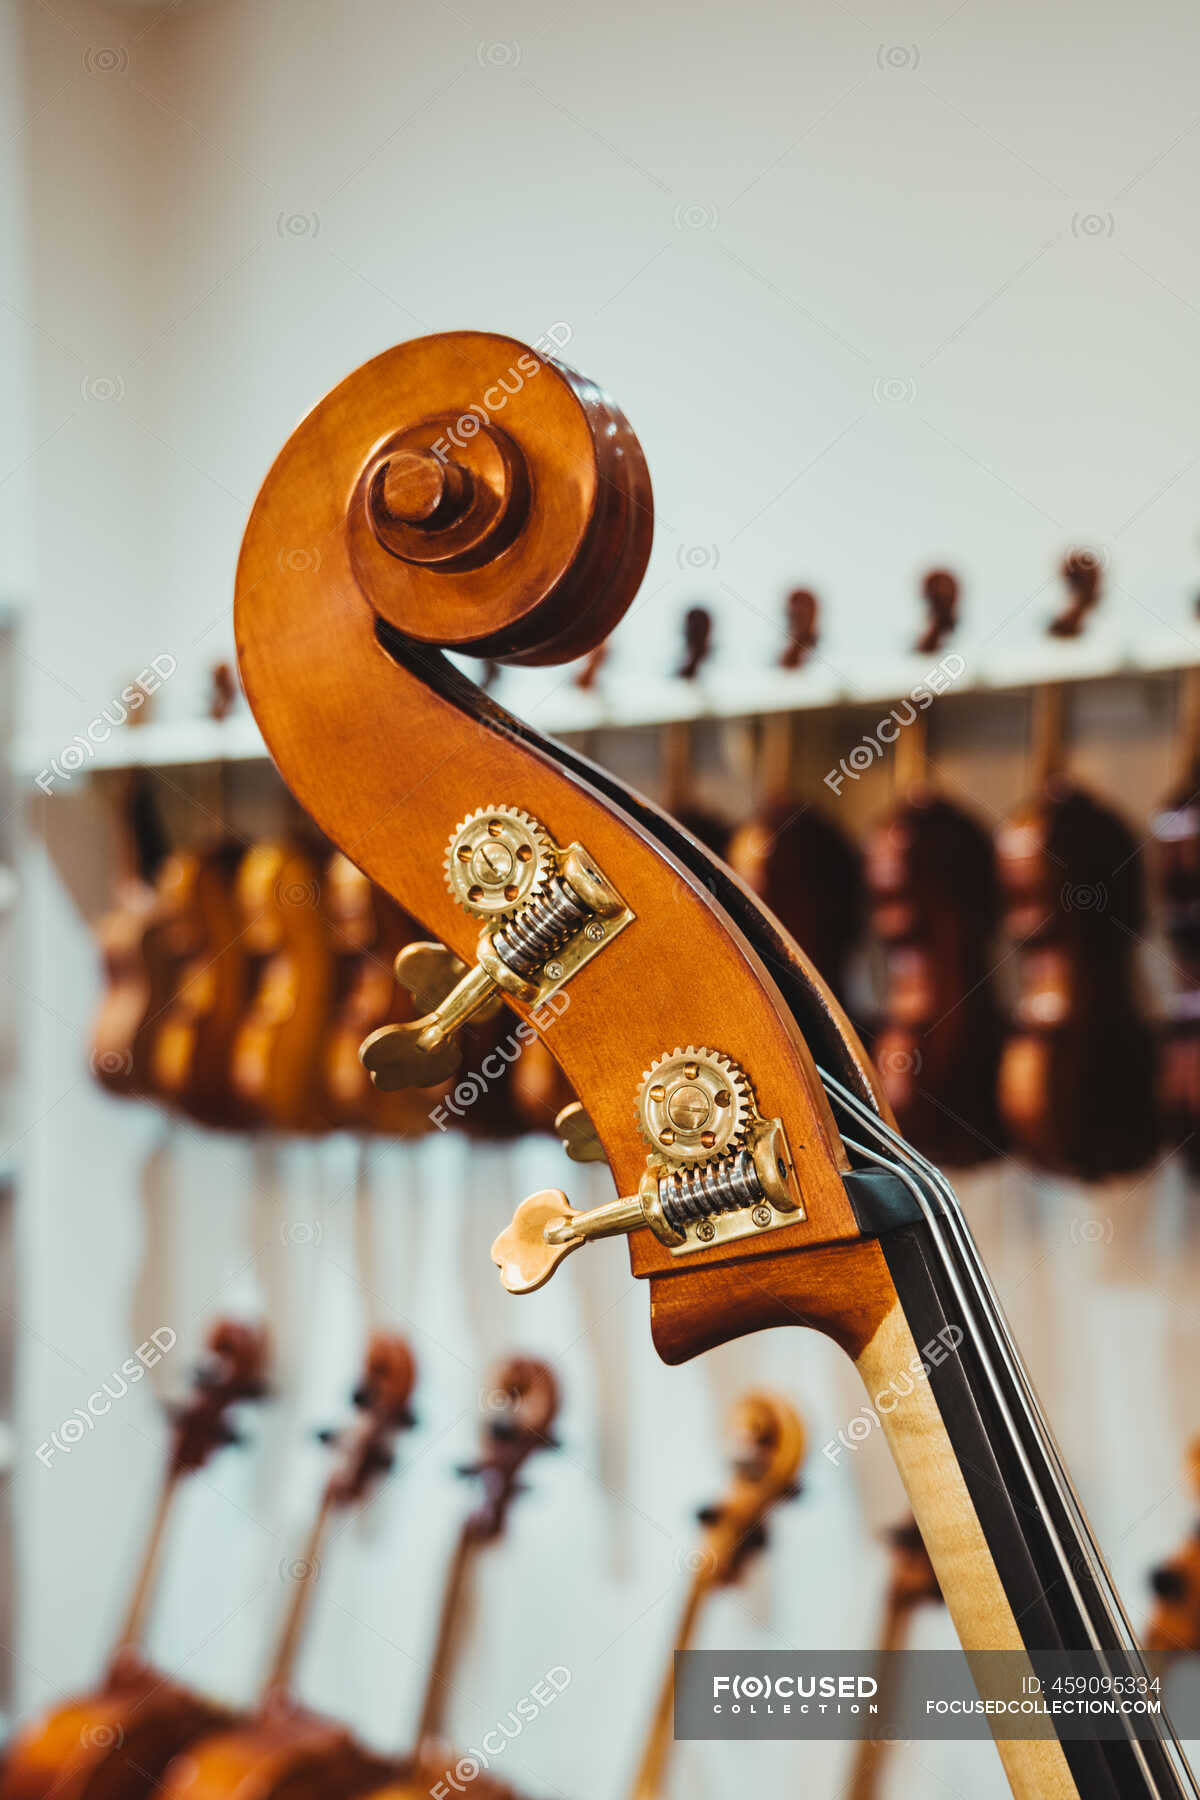 Modern violin curvy scroll with pegs collection of acoustic musical instruments on rack in studio — equipment - Stock Photo #459095334